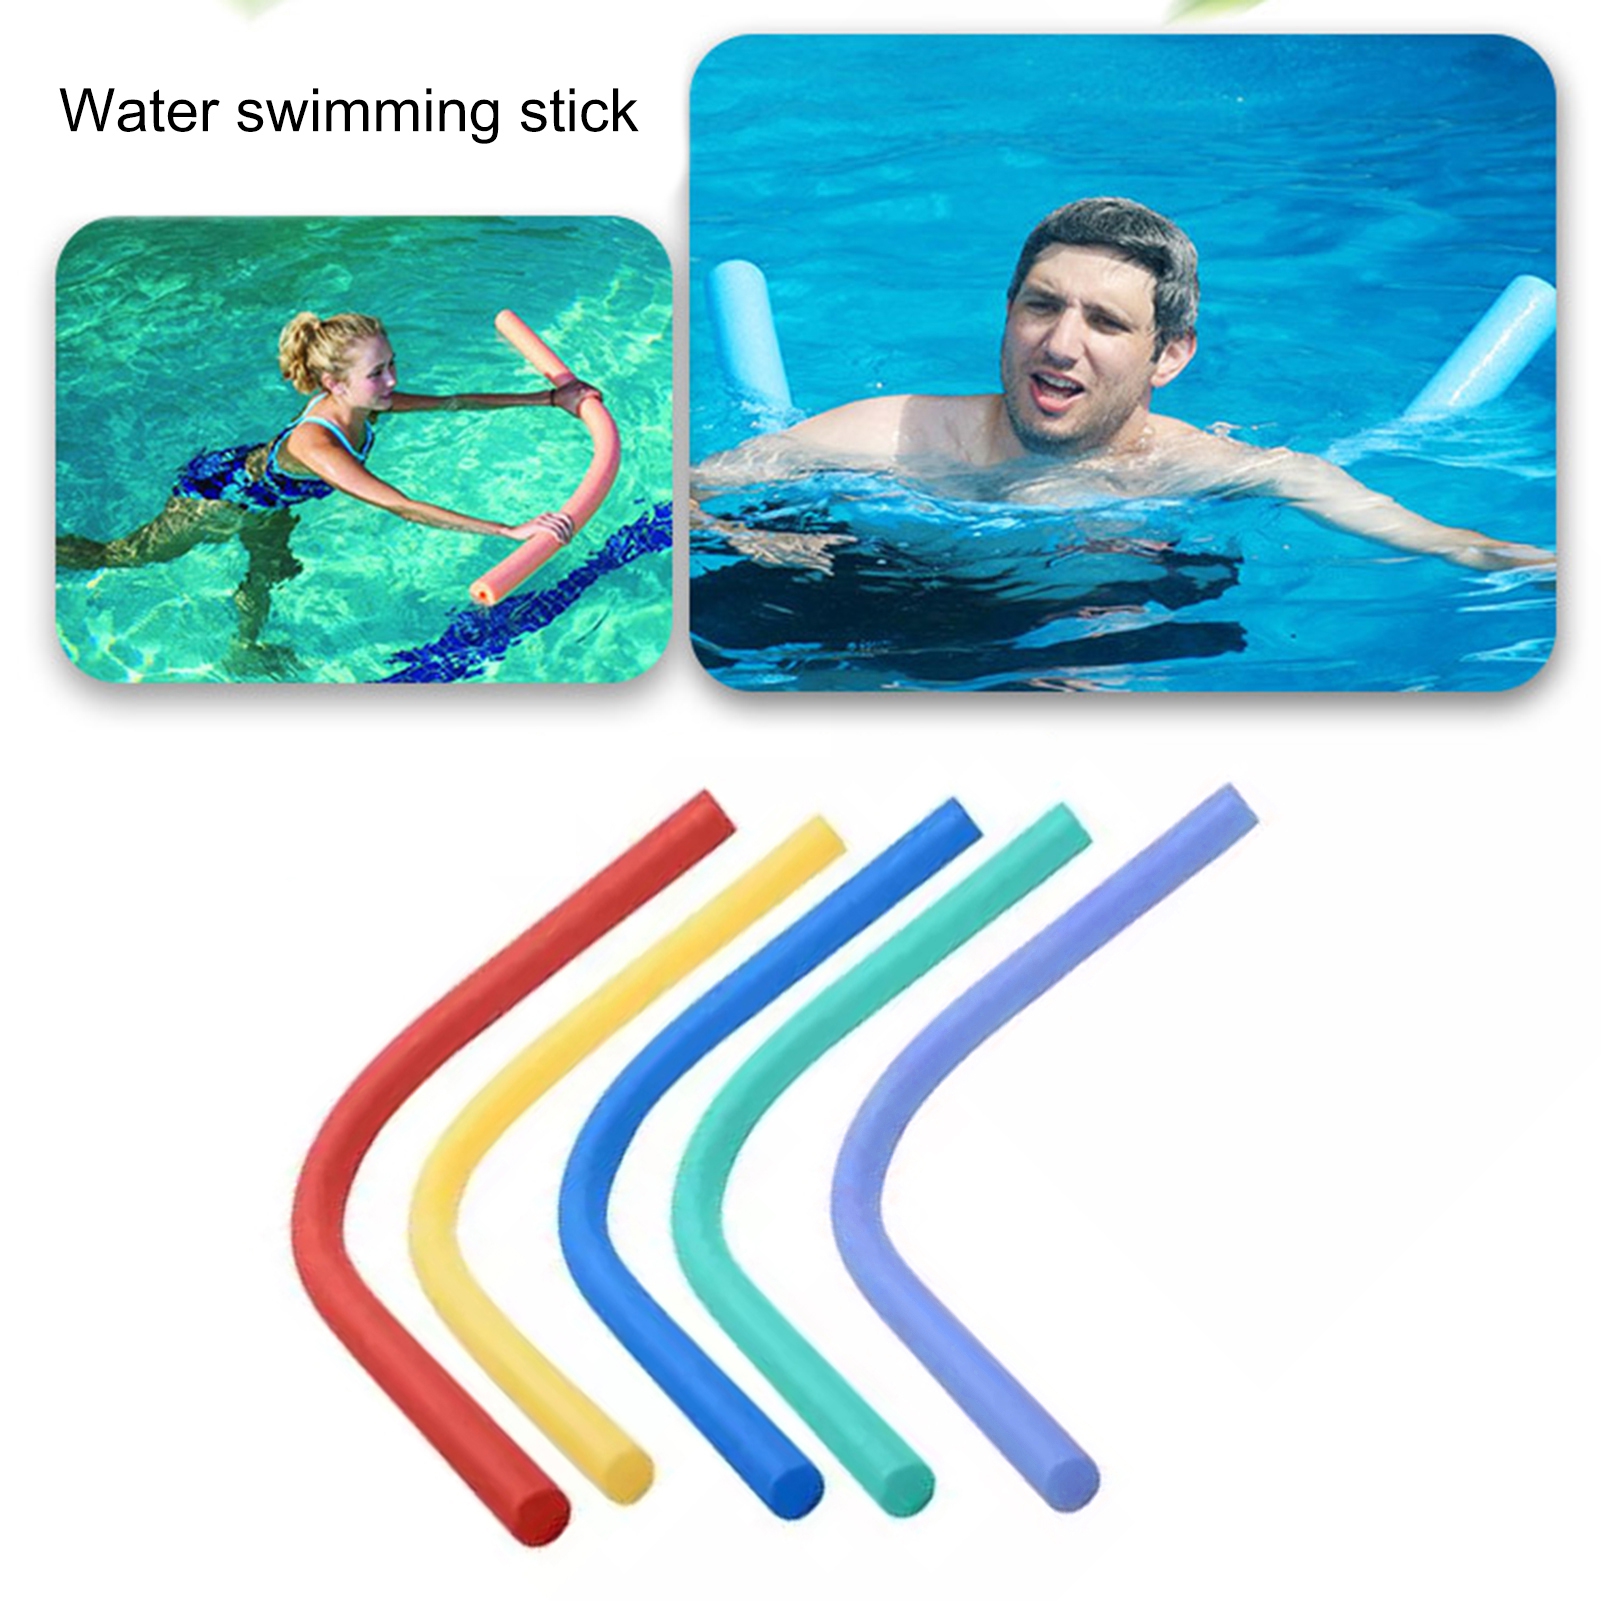 Hesroicy Floating Pool Noodles Foam Tube Swimming Thick Noodles For